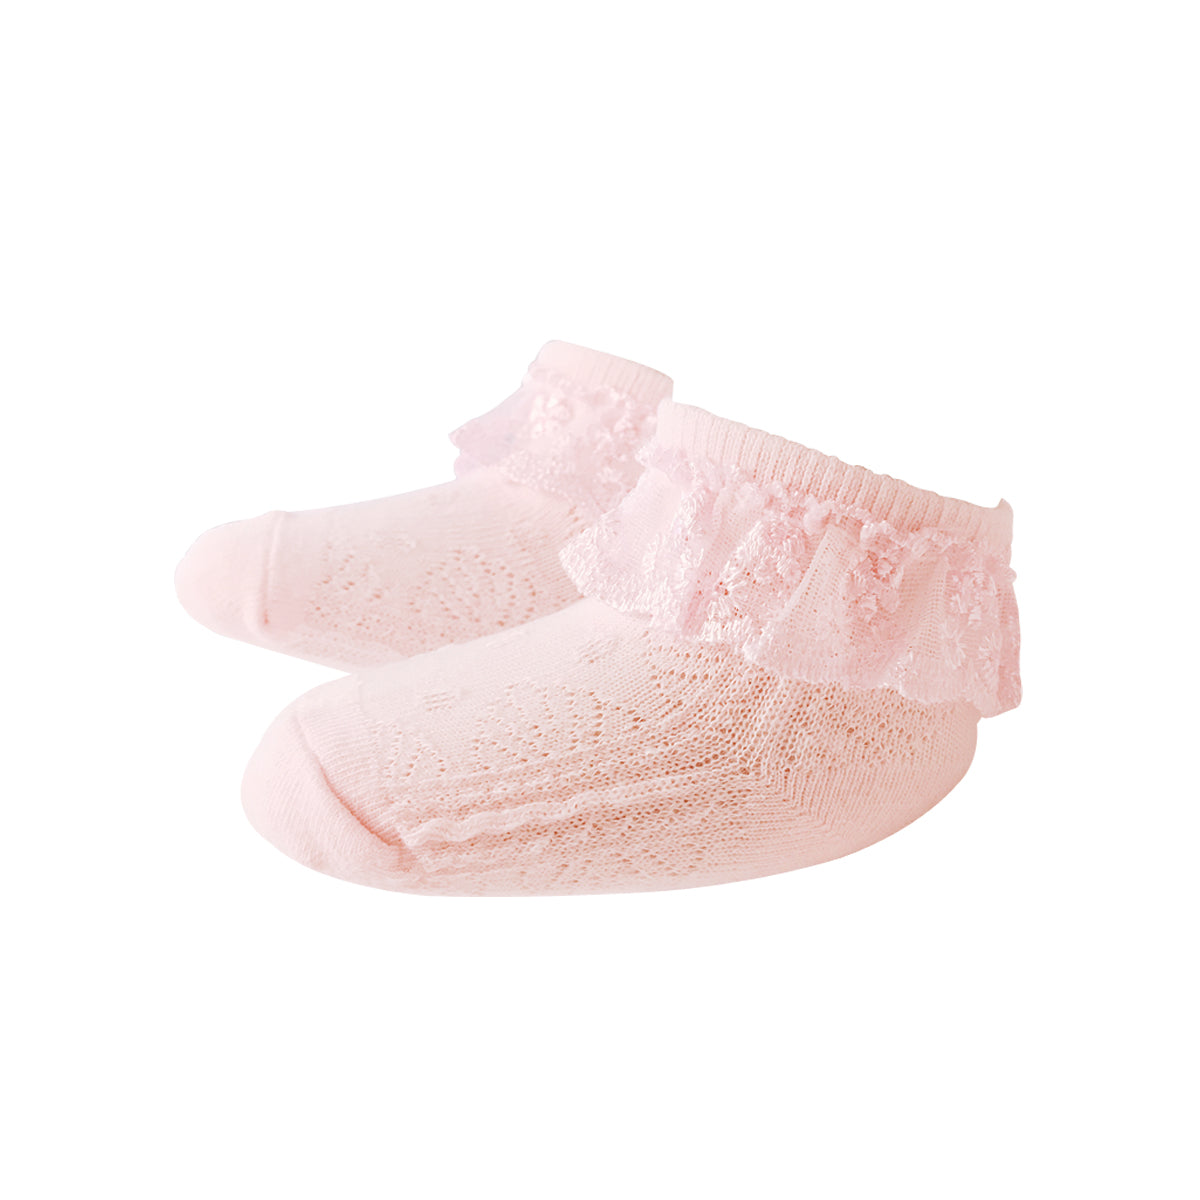 Wrapables Precious Lace Cuff Socks for Baby (Set of 3)